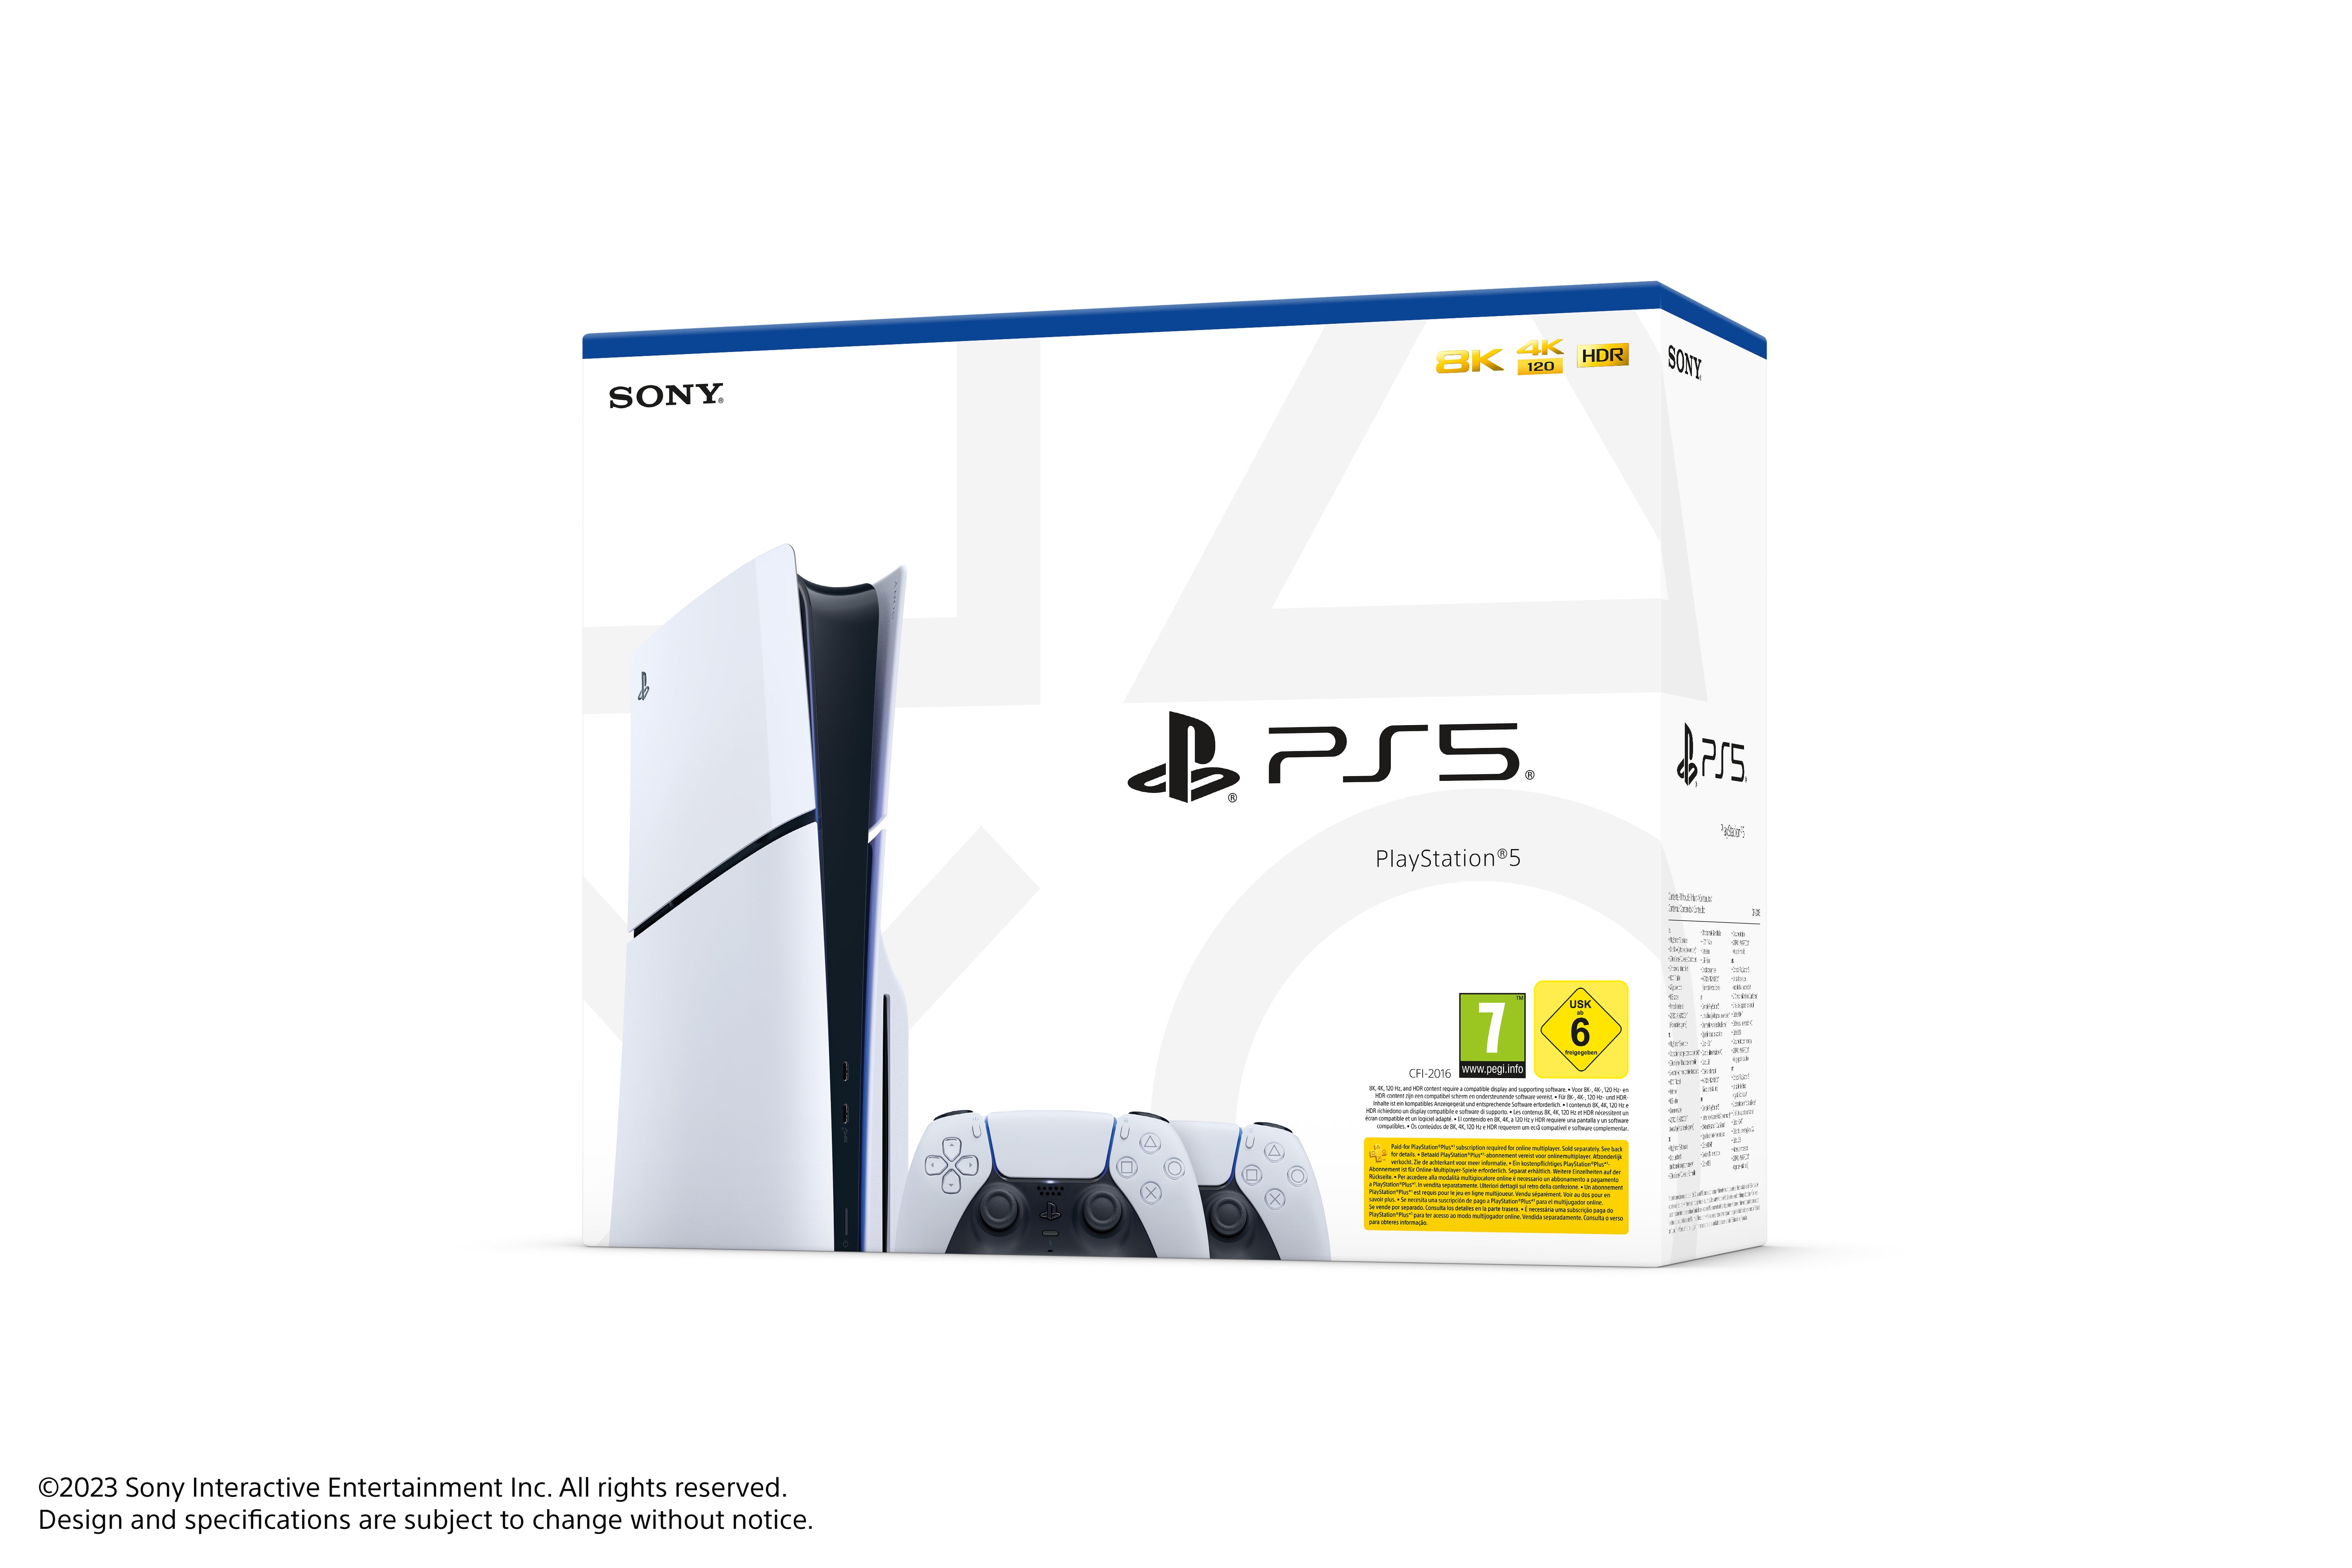 Sony Playstation 5 Slim with disc drive incl 2. Controller